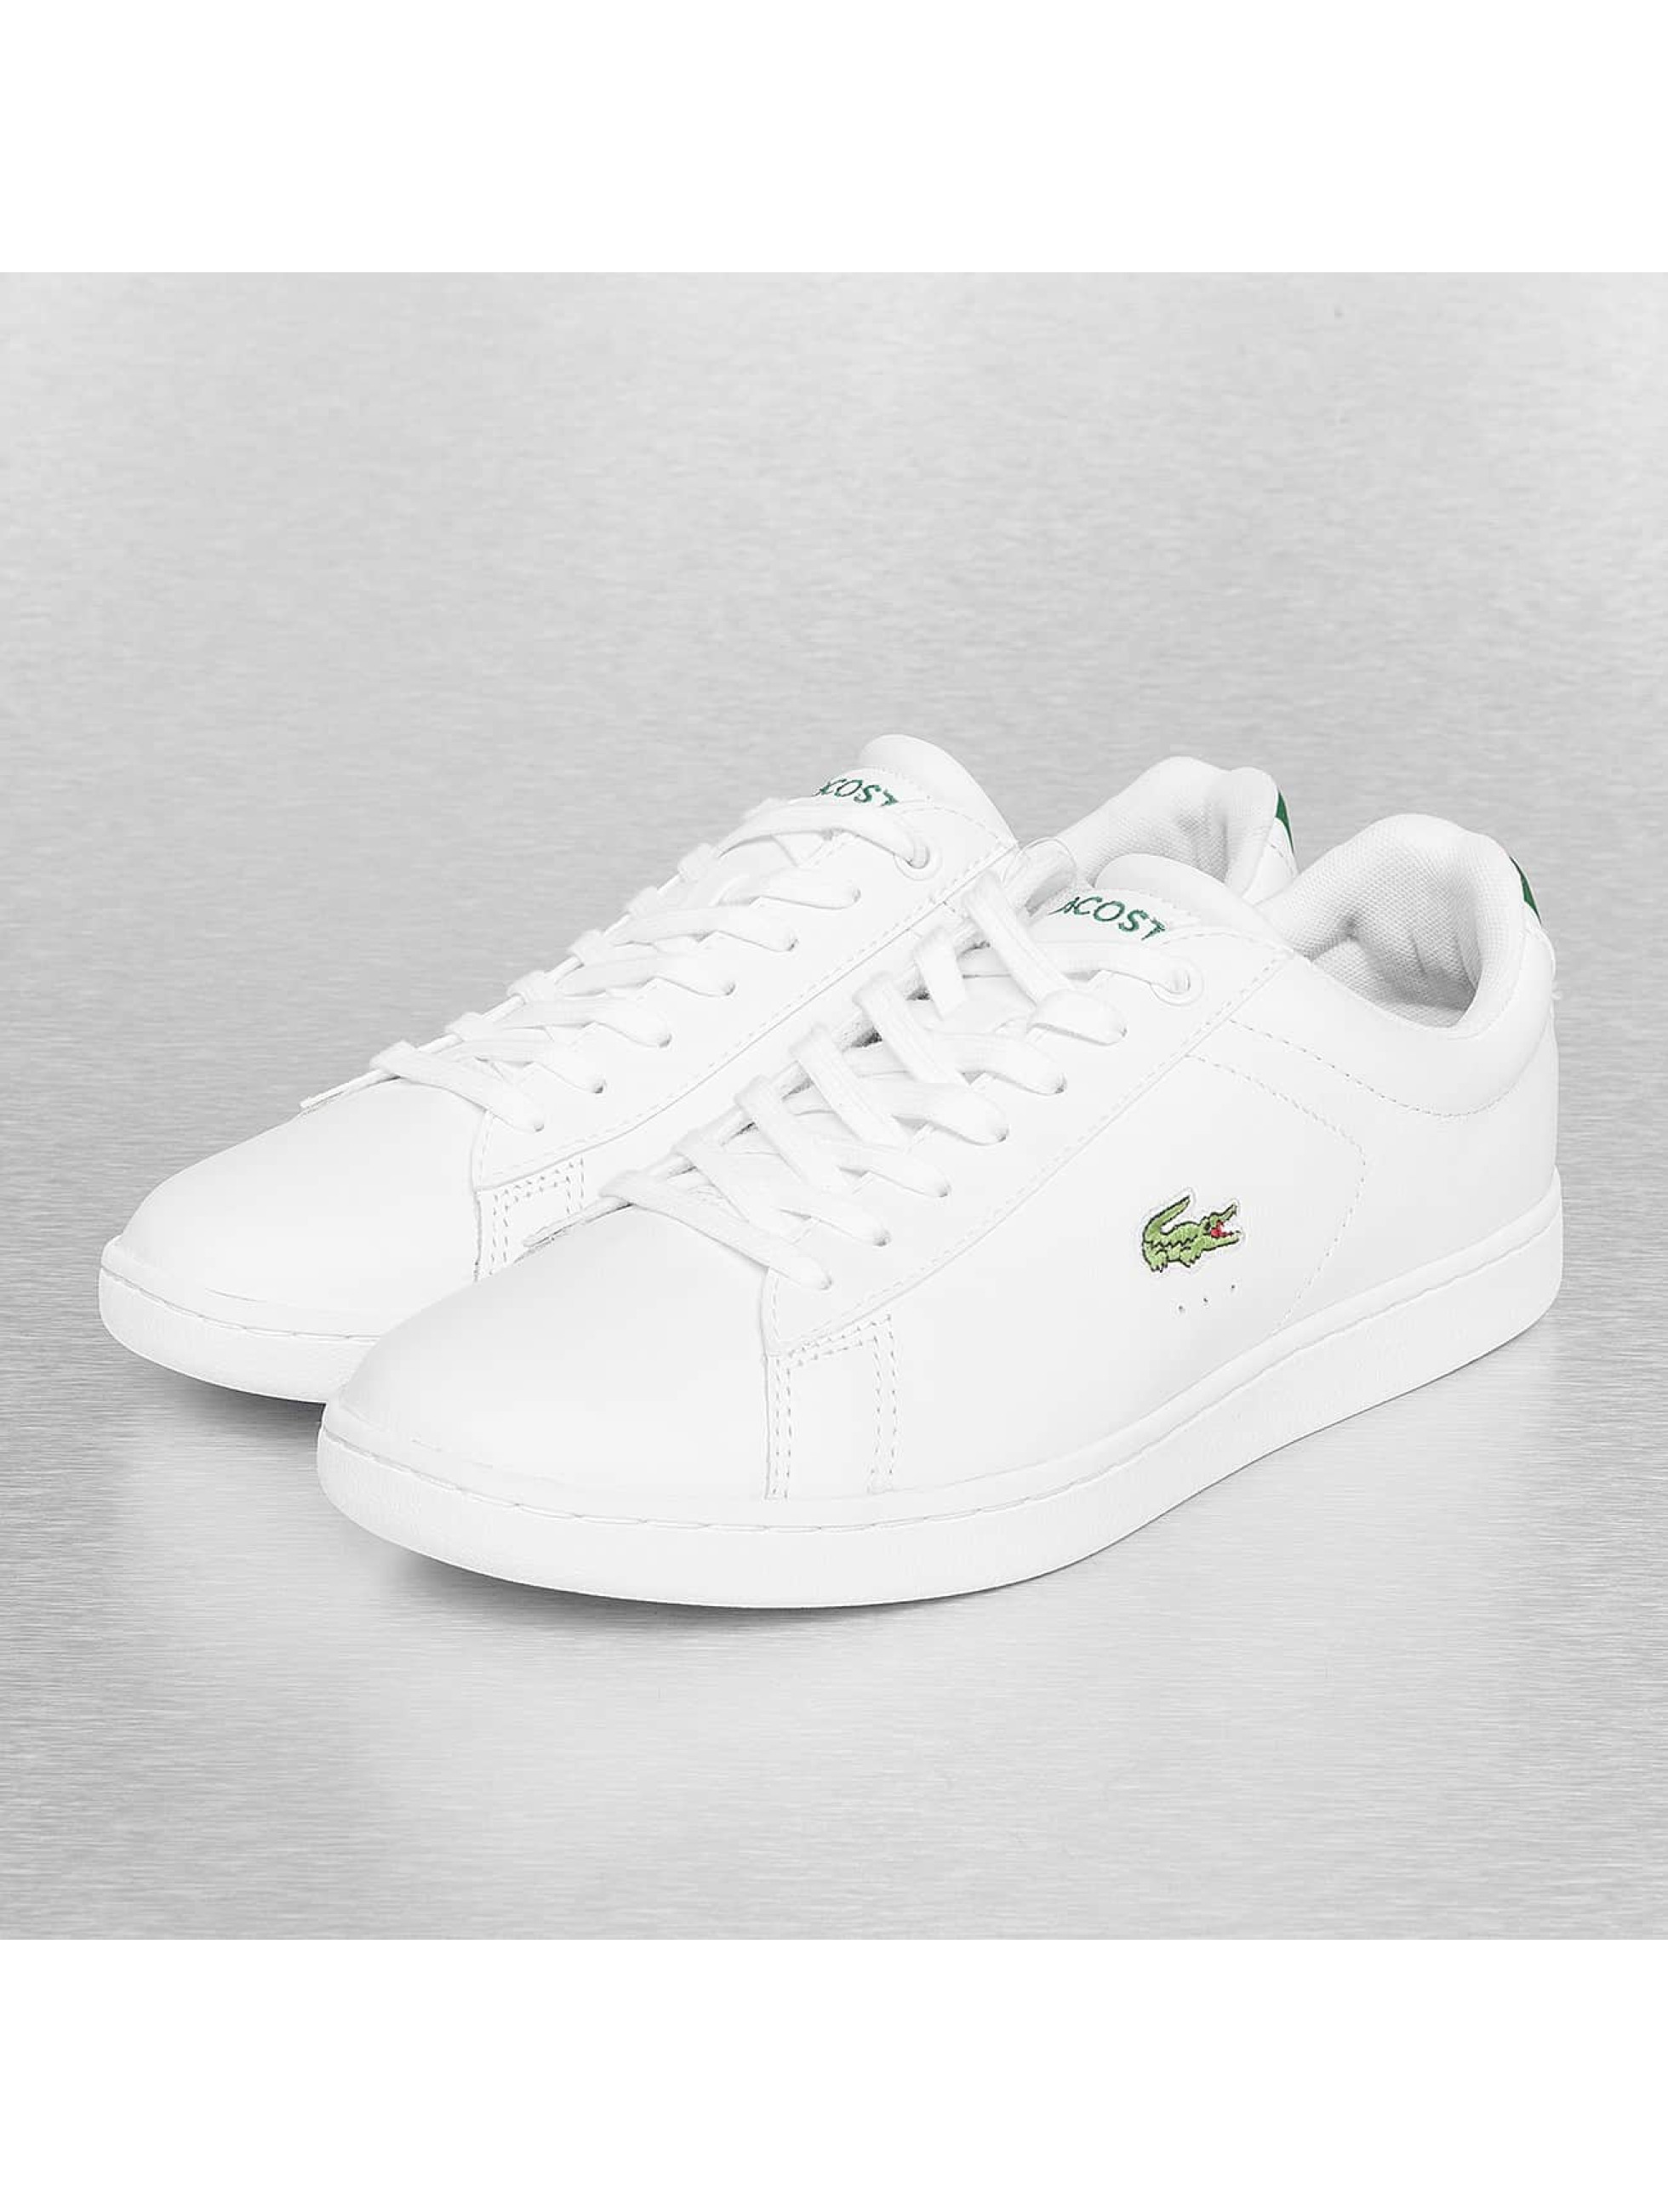 Lacoste Chaussures / Baskets Carnaby Evo S216 en blanc